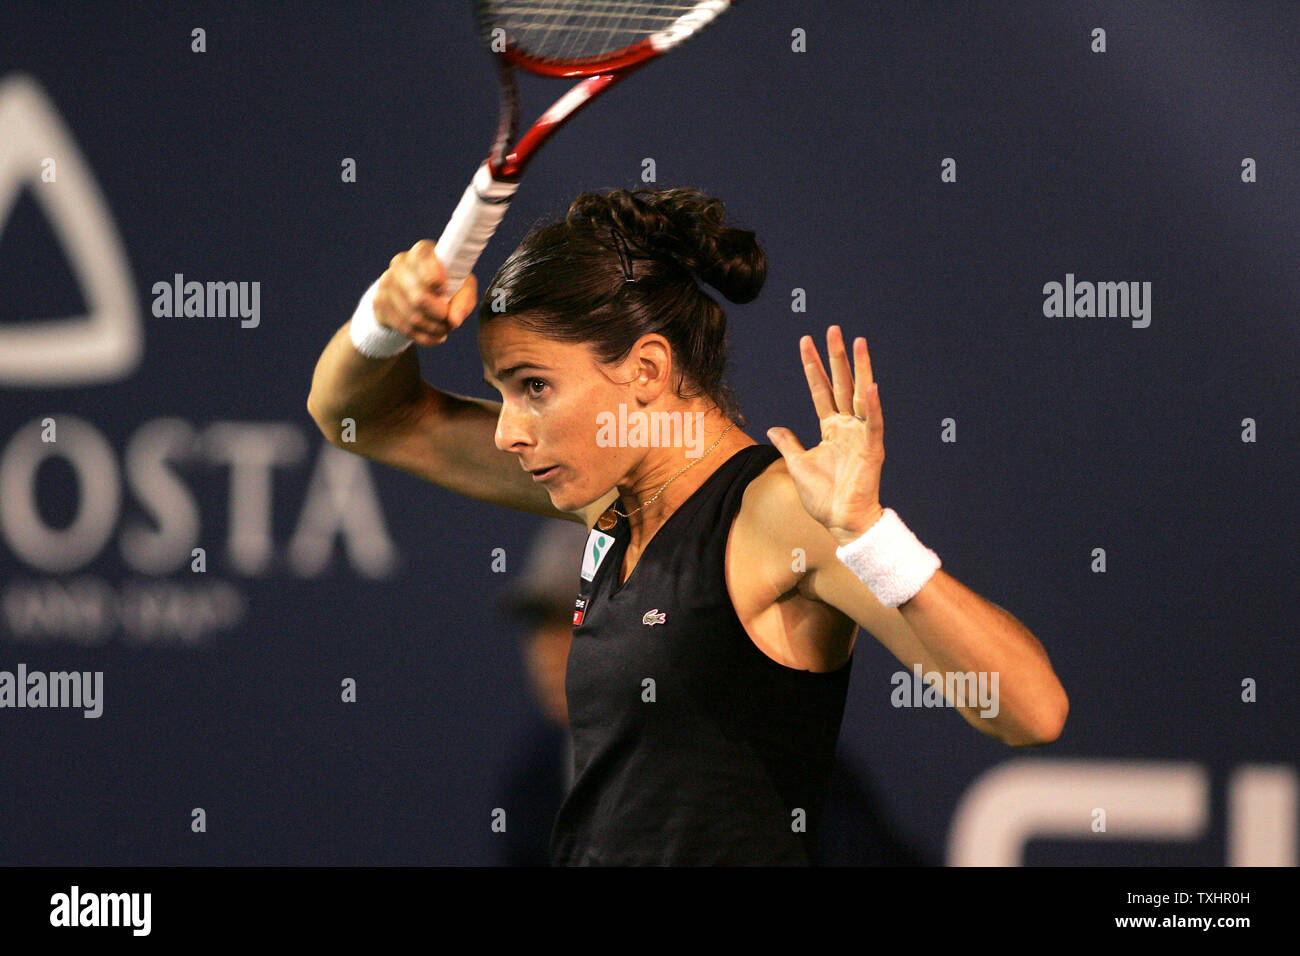 Nathalie Dechy of France is defeated by Mary Pierce of France (7-5, 6-3) in 3rd round match at Acura Classic women's tennis tournament, Carlsbad, California, USA on August 04, 2005. Singles final is on Sunday, August 7, 2005.  (UPI Photo/Tom Theobald) Stock Photo